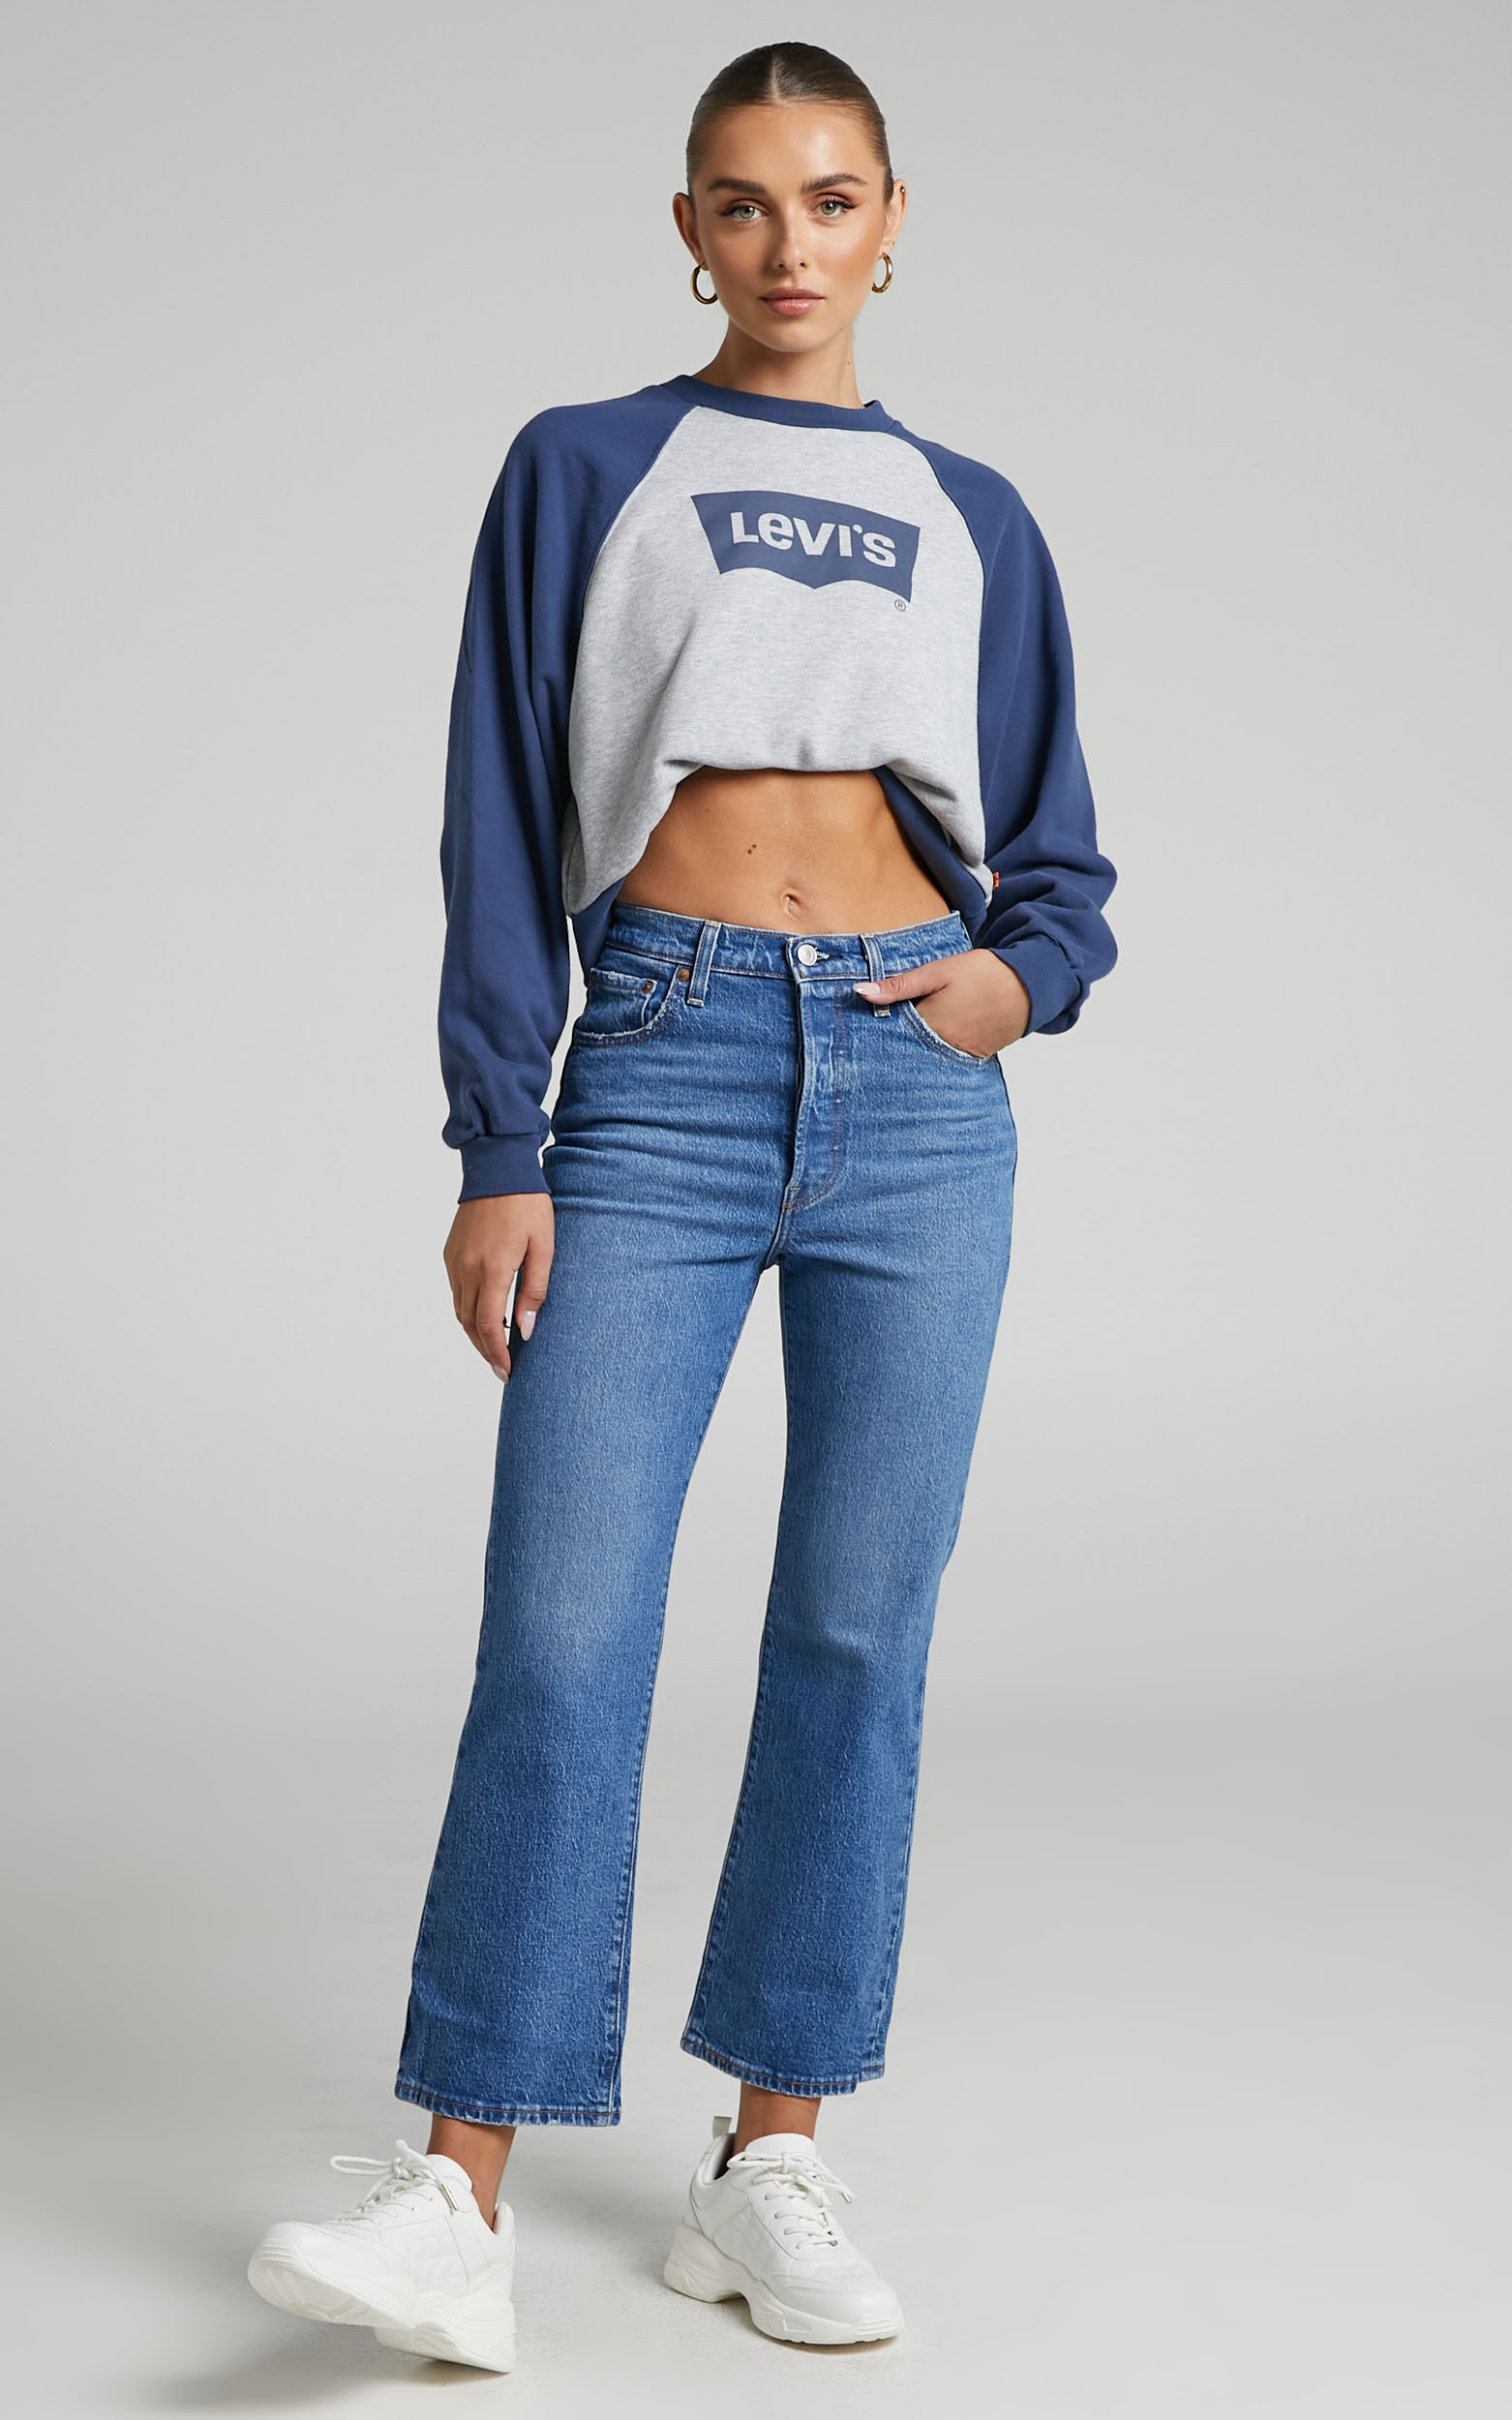 Levi's - Ribcage Crop Boot Jean in JAZZ ICON - 06, BLU1, hi-res image number null